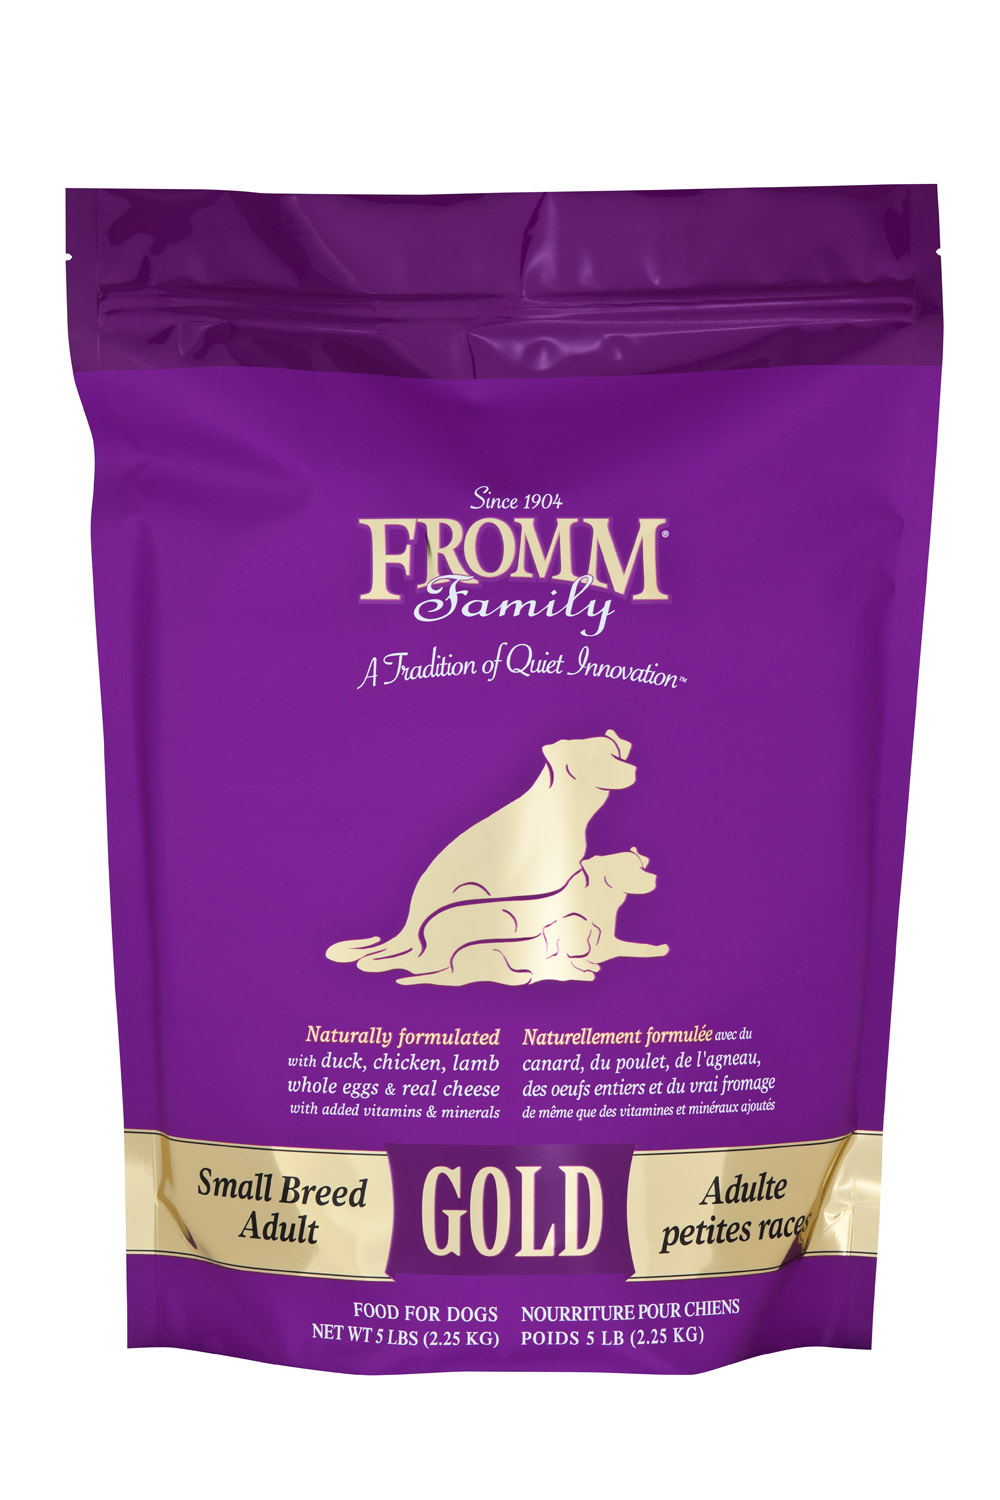 Fromm Family Small Breed Adult Gold Food for Dogs, 5 lbs